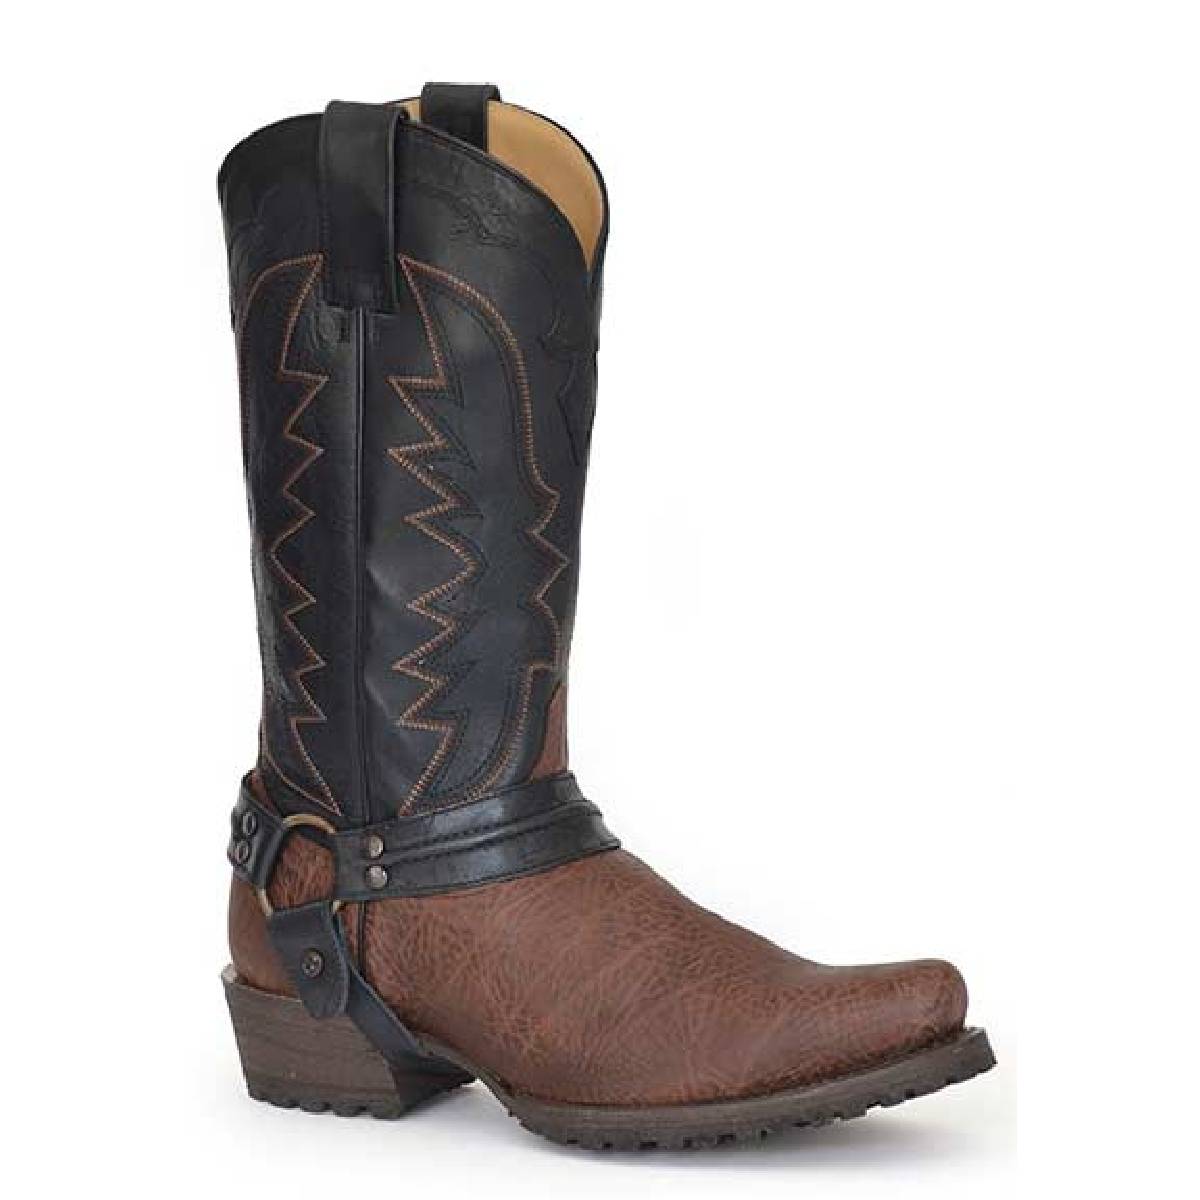 Men's Stetson Outlaw Tough Biker with Lug Sole Boots Handcrafted Sanded Brown - yeehawcowboy